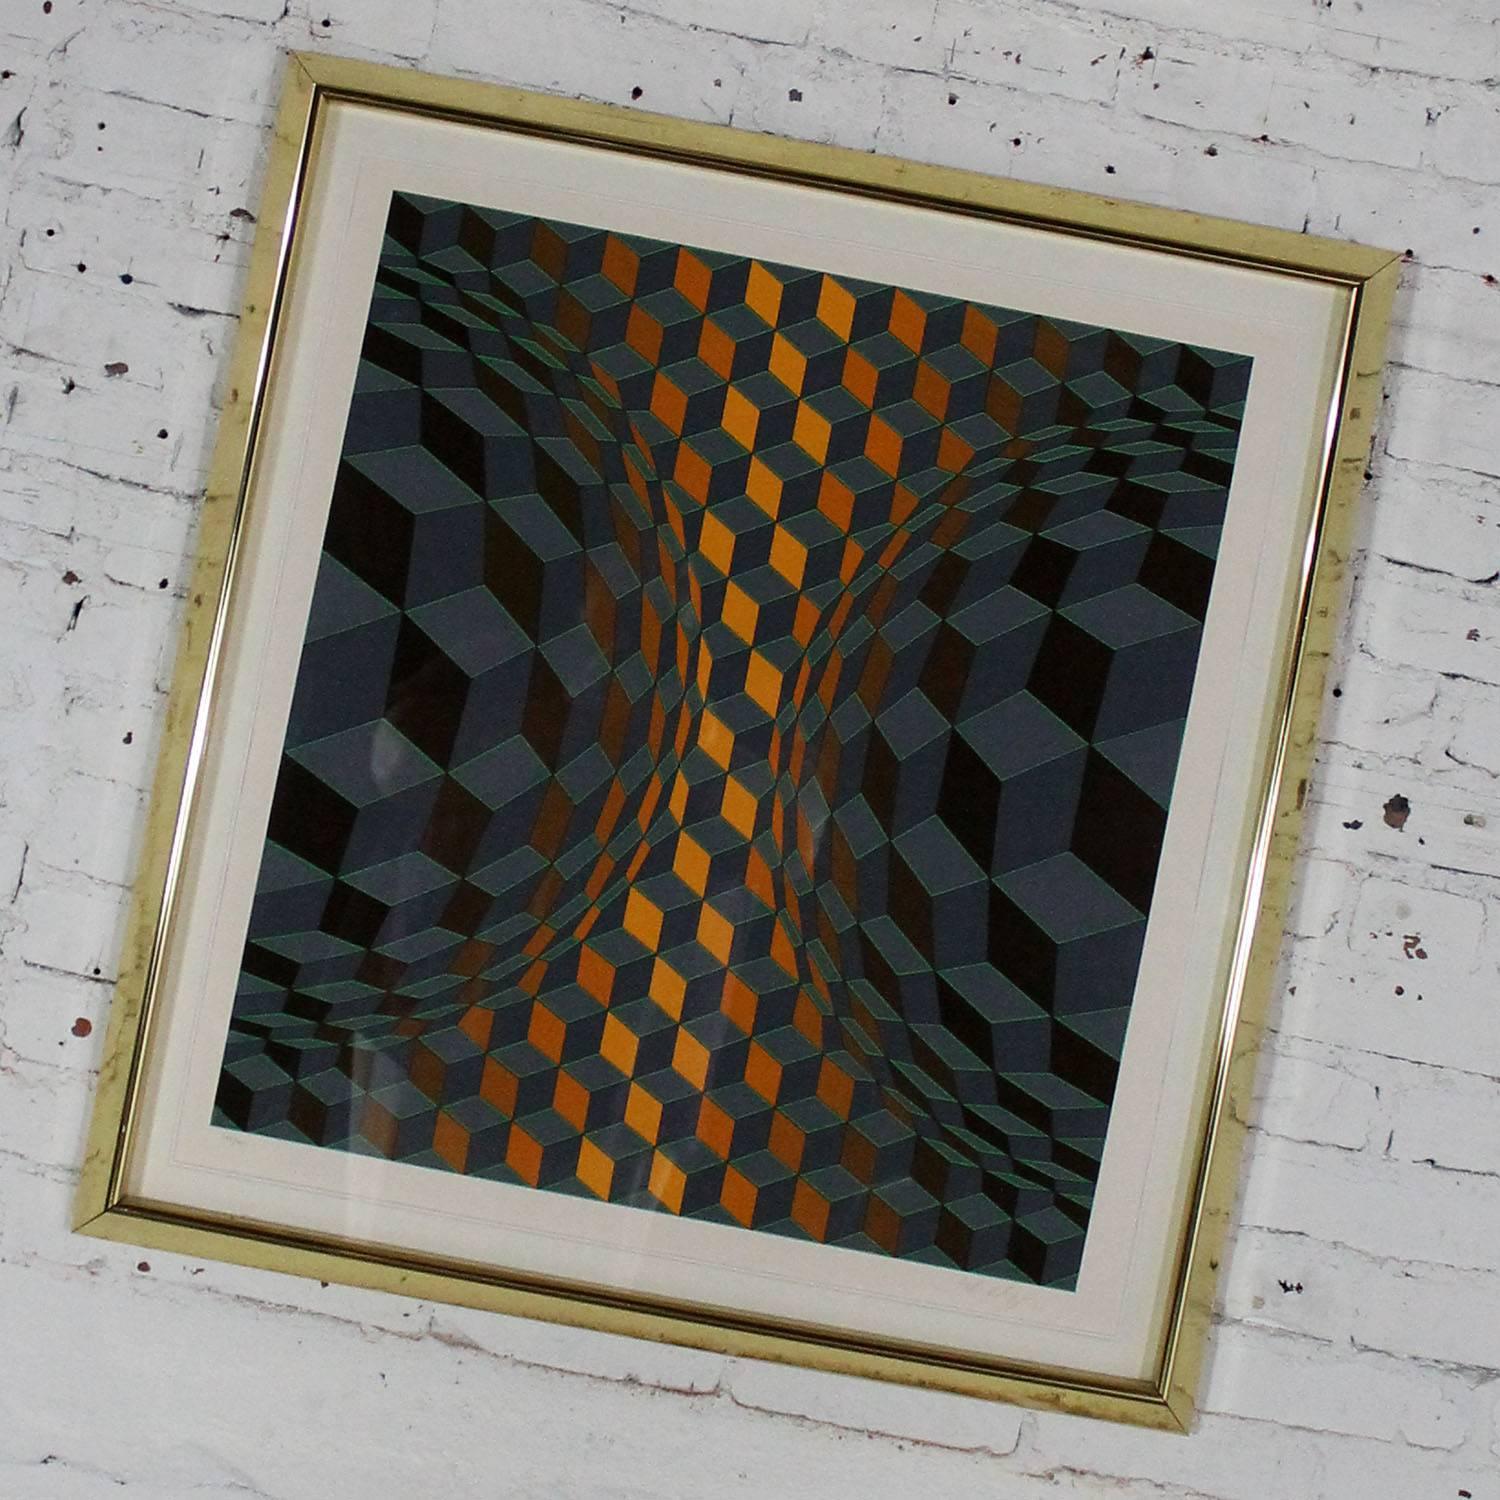 Incredible serigraph by world renowned Kinetic and Op Art artist, Victor Vasarely. This piece is titled Bi-Cheyt and is pencil signed and numbered 179/250. It was originally sold by Park West Galleries, circa 1980s and has a registration number of